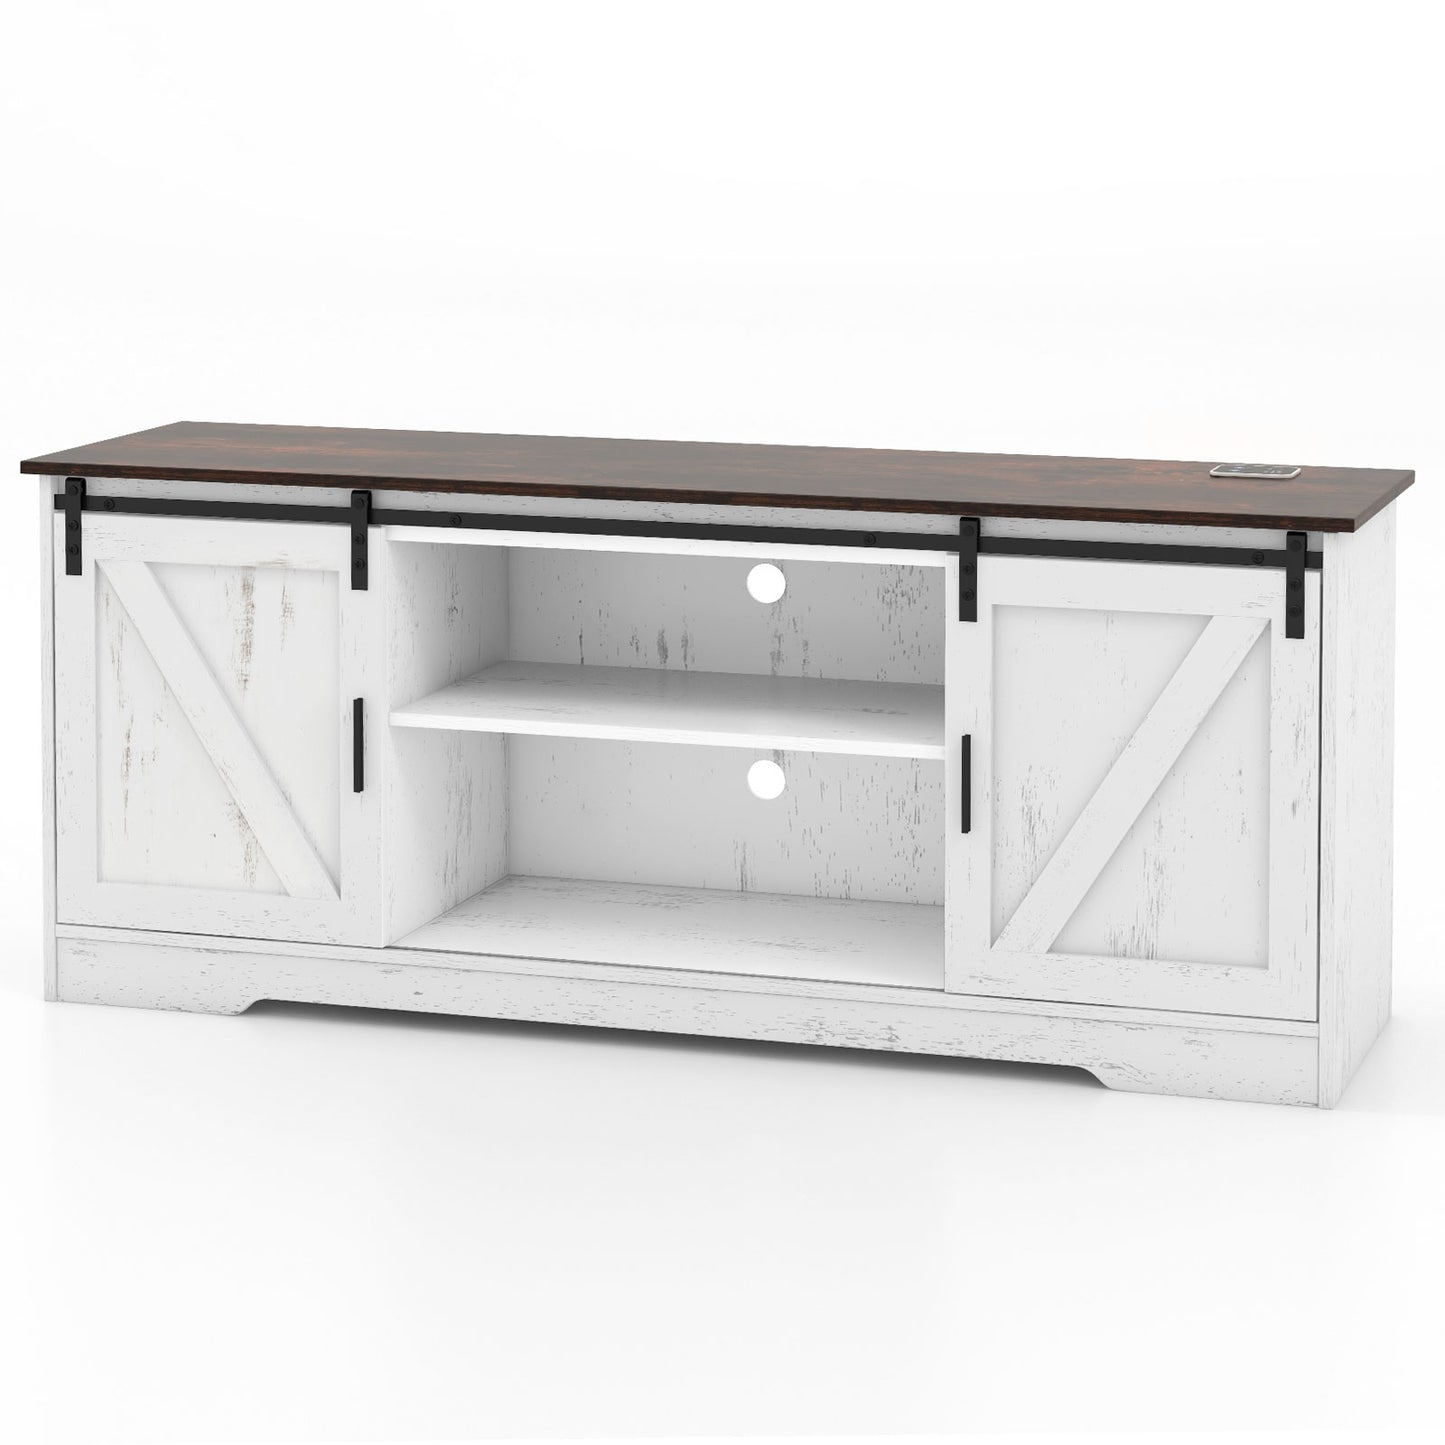 TV Stand for 65" TVs Media Console Table for Living Room-White